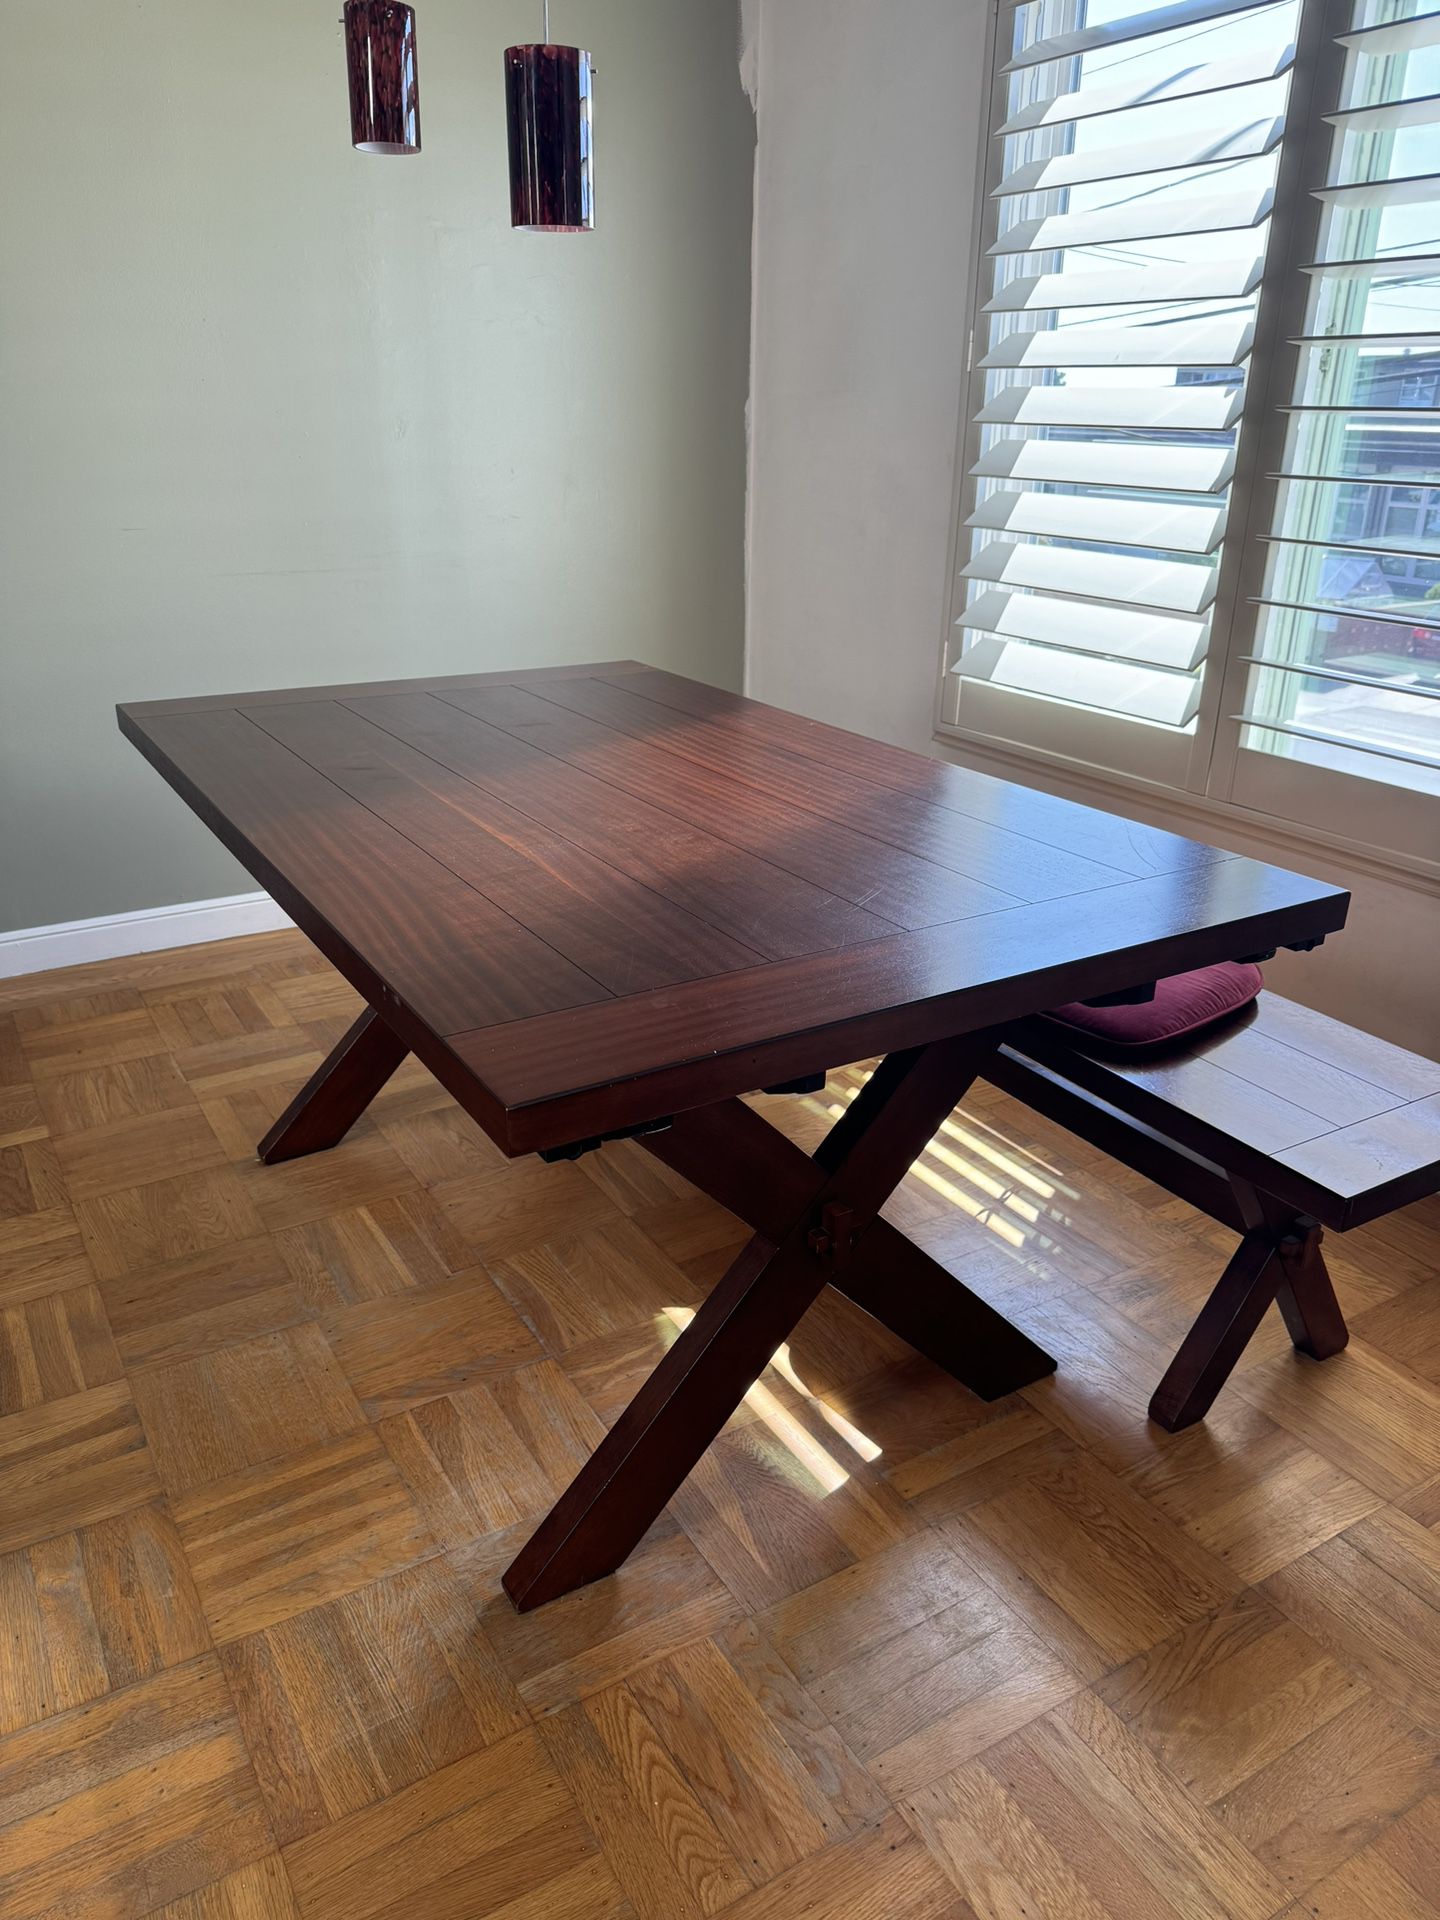 Dining Table Moving Out Sale!